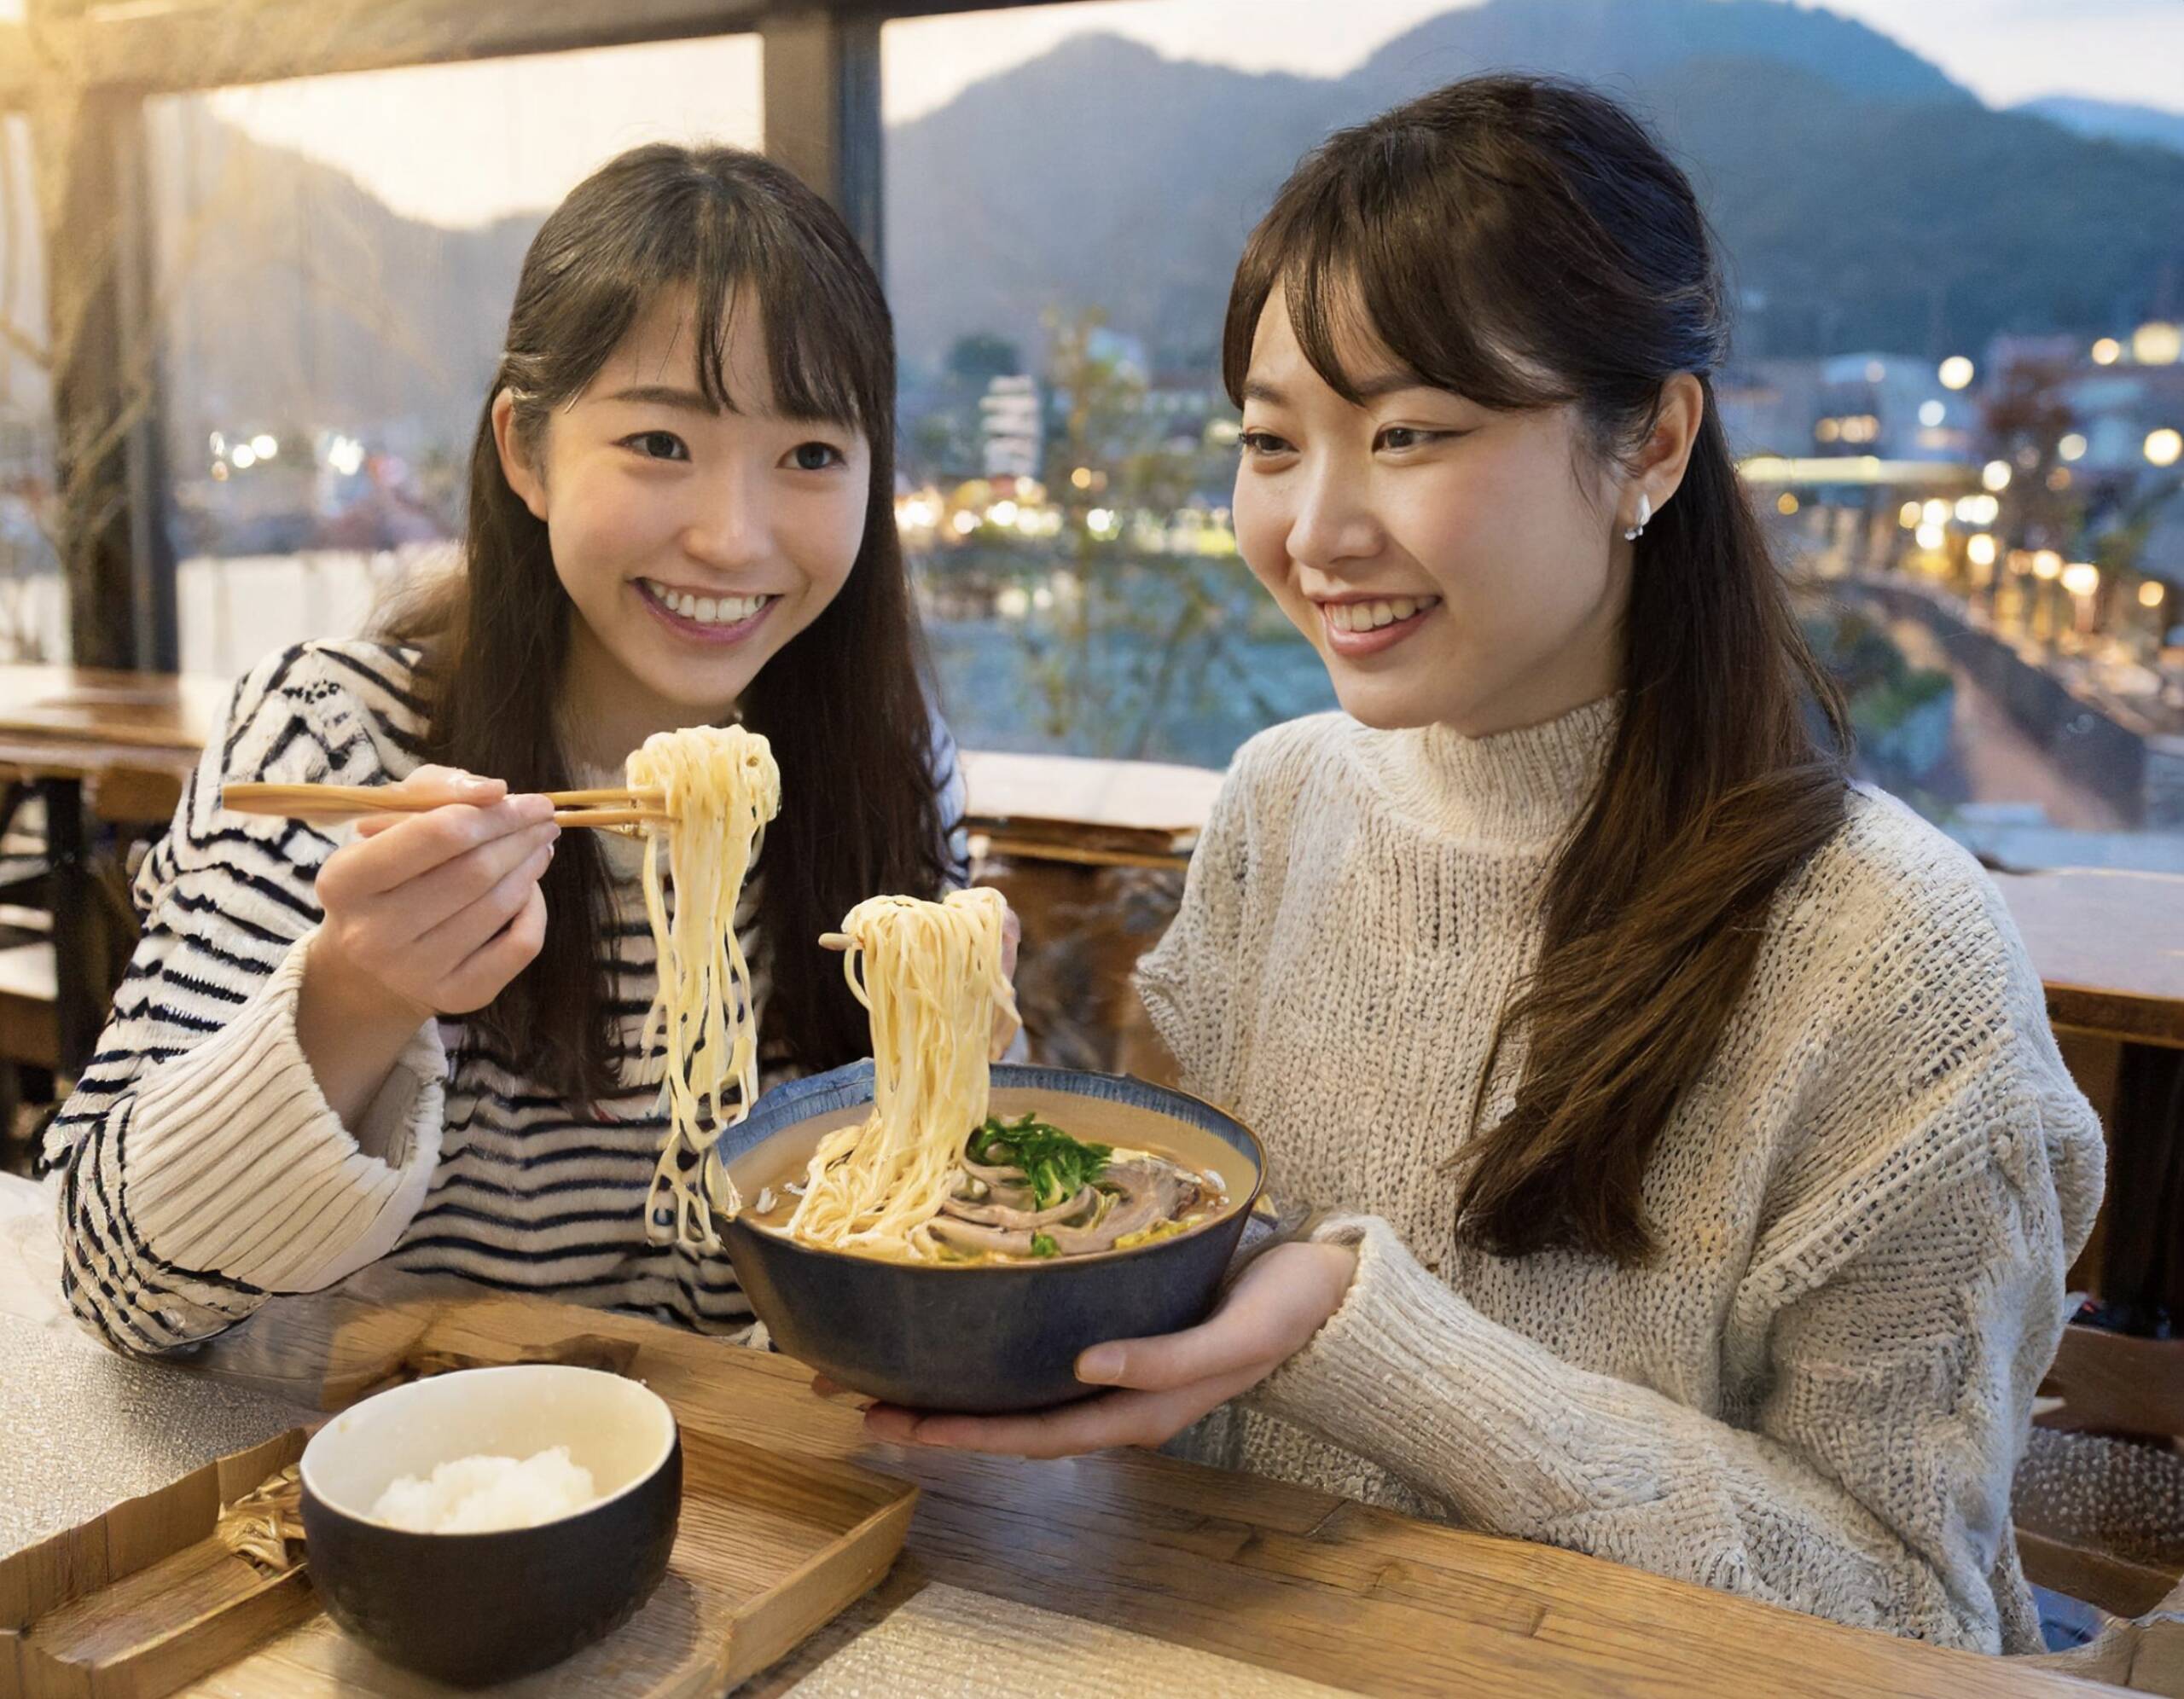 The term "ramen girls" refers to a recent trend in Japan where women are increasingly embracing ramen culture